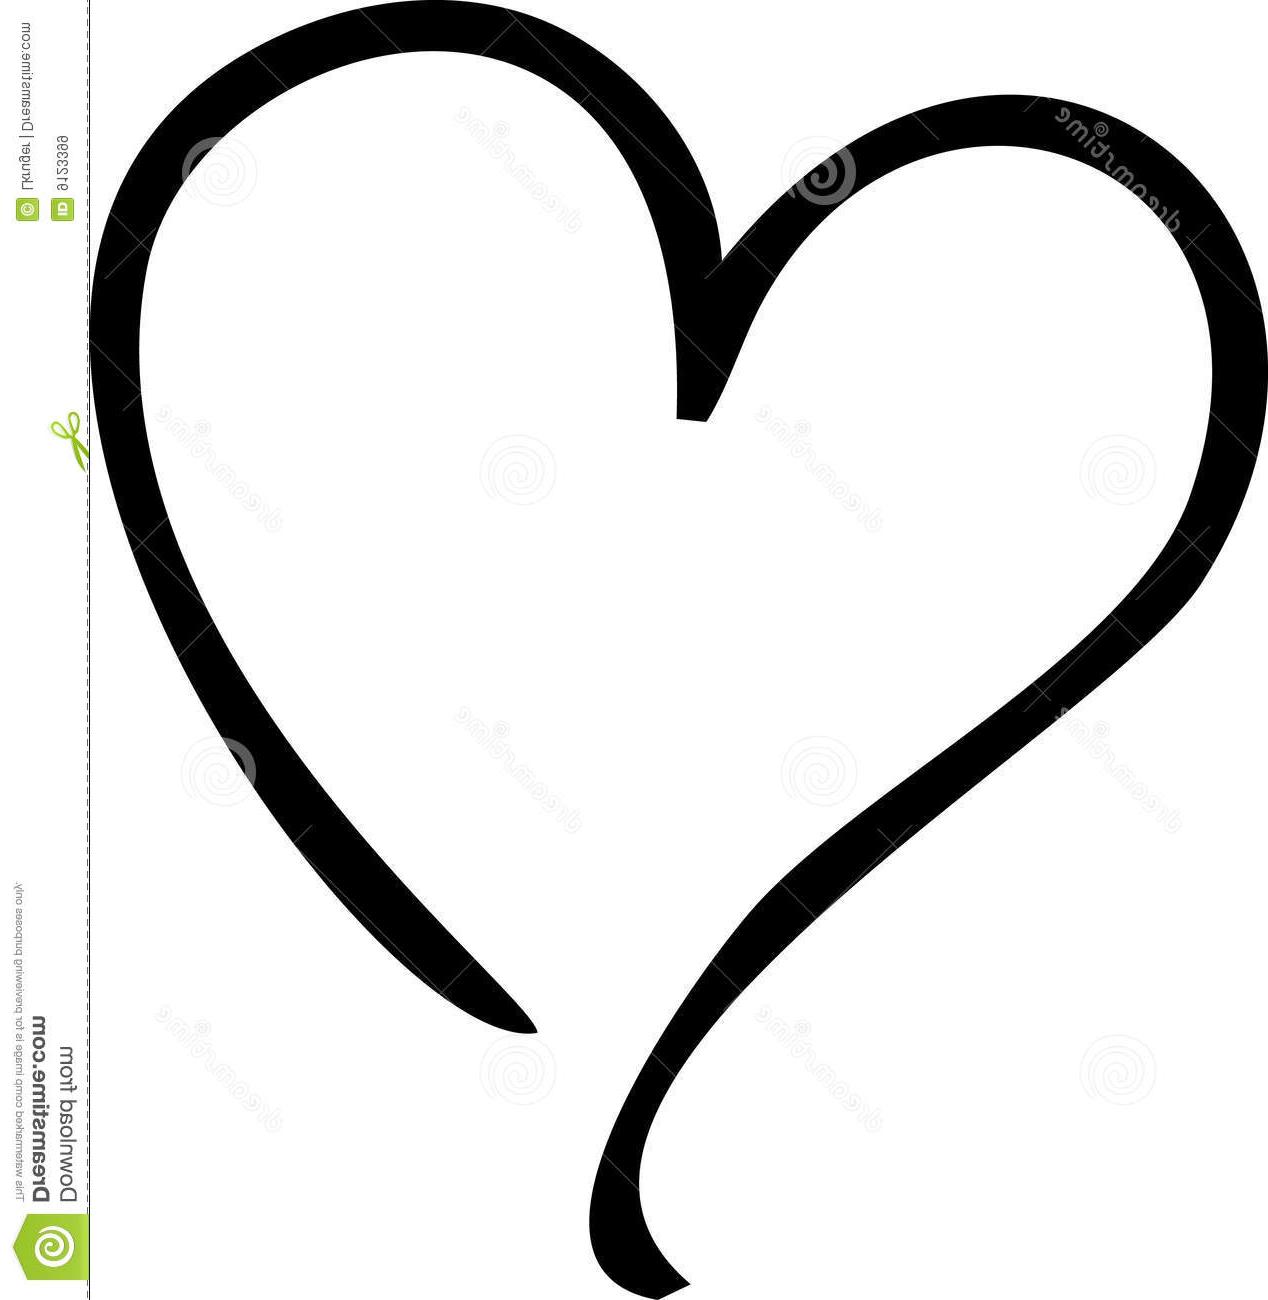 Download Heart Outline Vector at Vectorified.com | Collection of ...